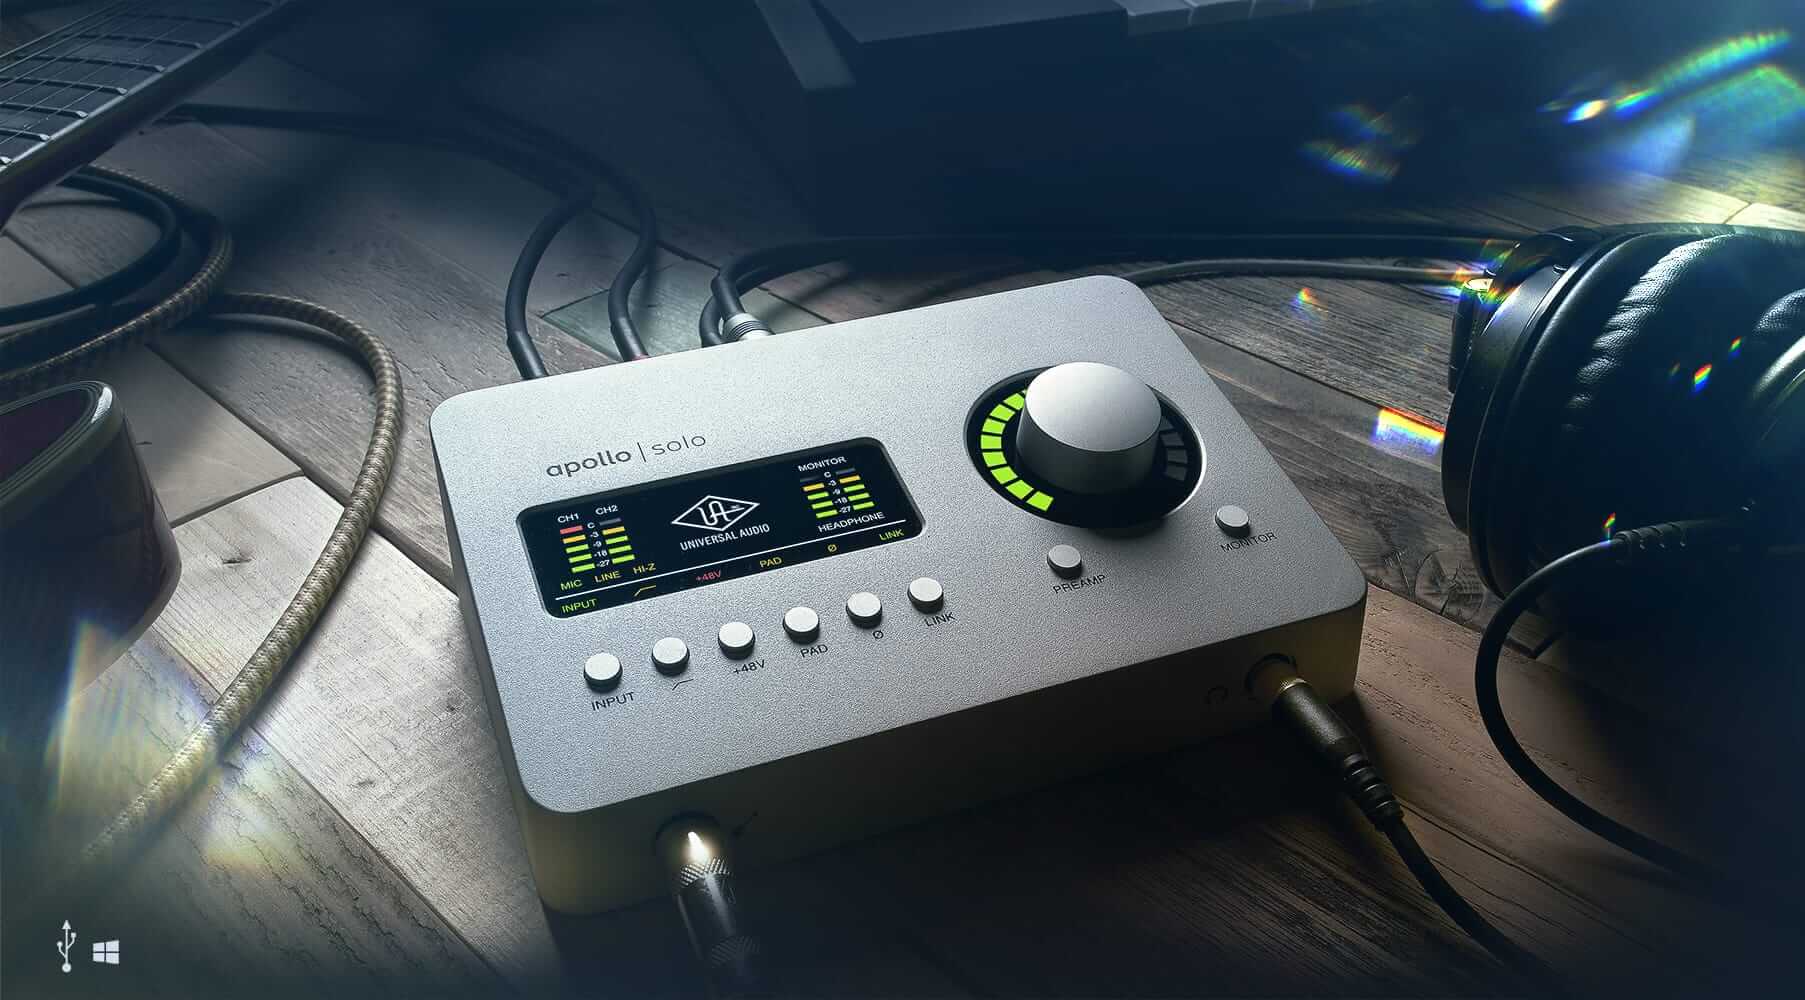 With its Thunderbolt 3 port, the UA Apollo Solo is the best audio interface for solo artists on Mac computers.